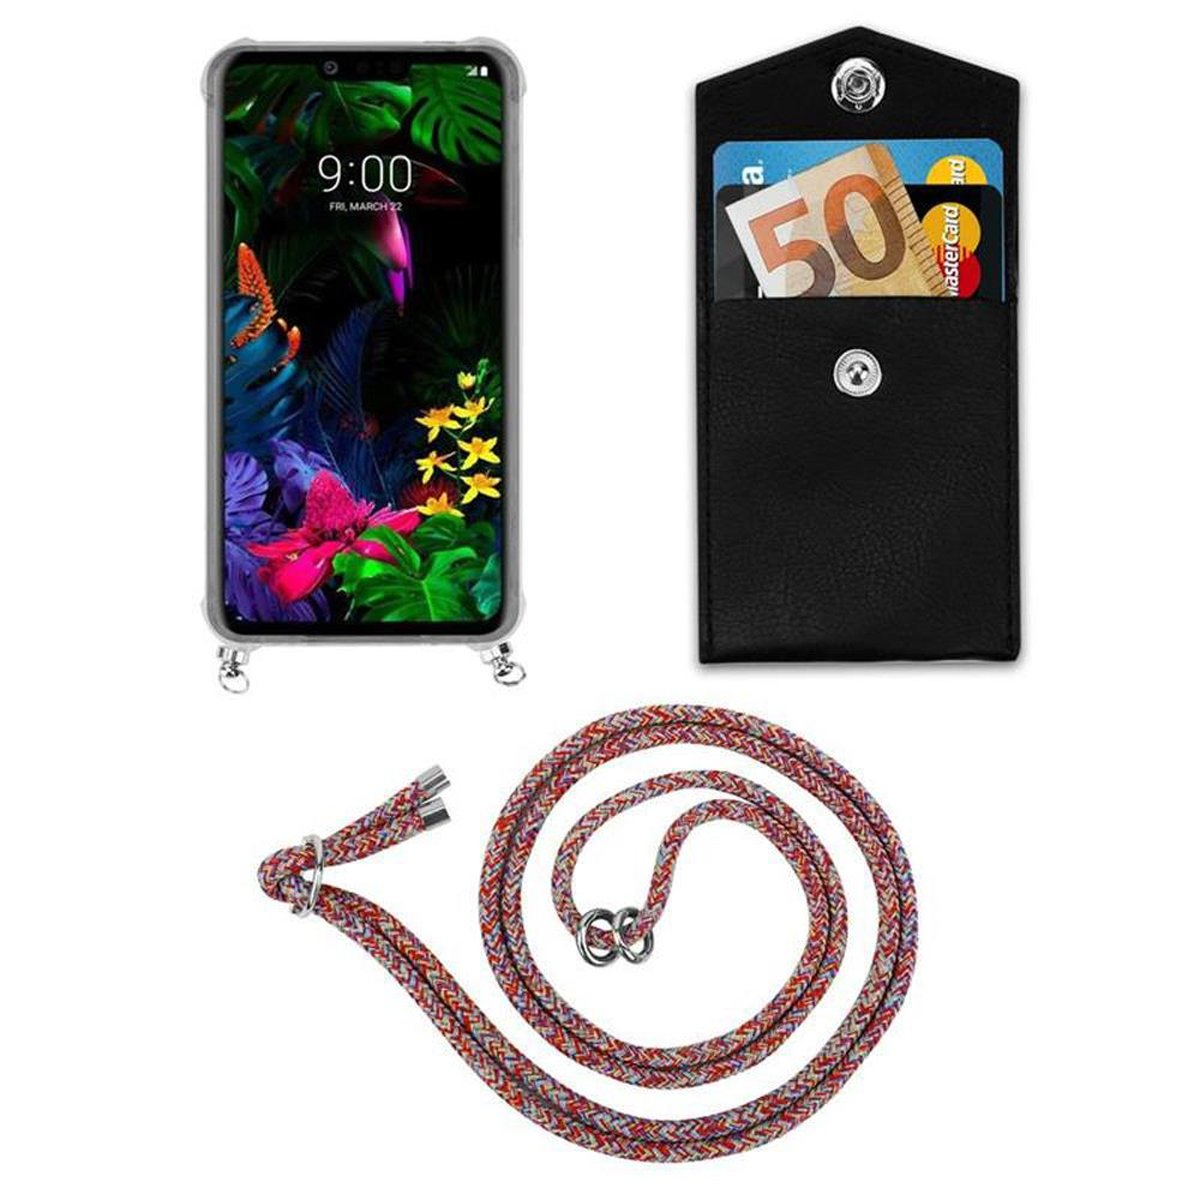 PARROT LG, CADORABO Ringen, ThinQ, COLORFUL Silber Kordel und Band Handy Backcover, mit abnehmbarer G8 Hülle, Kette